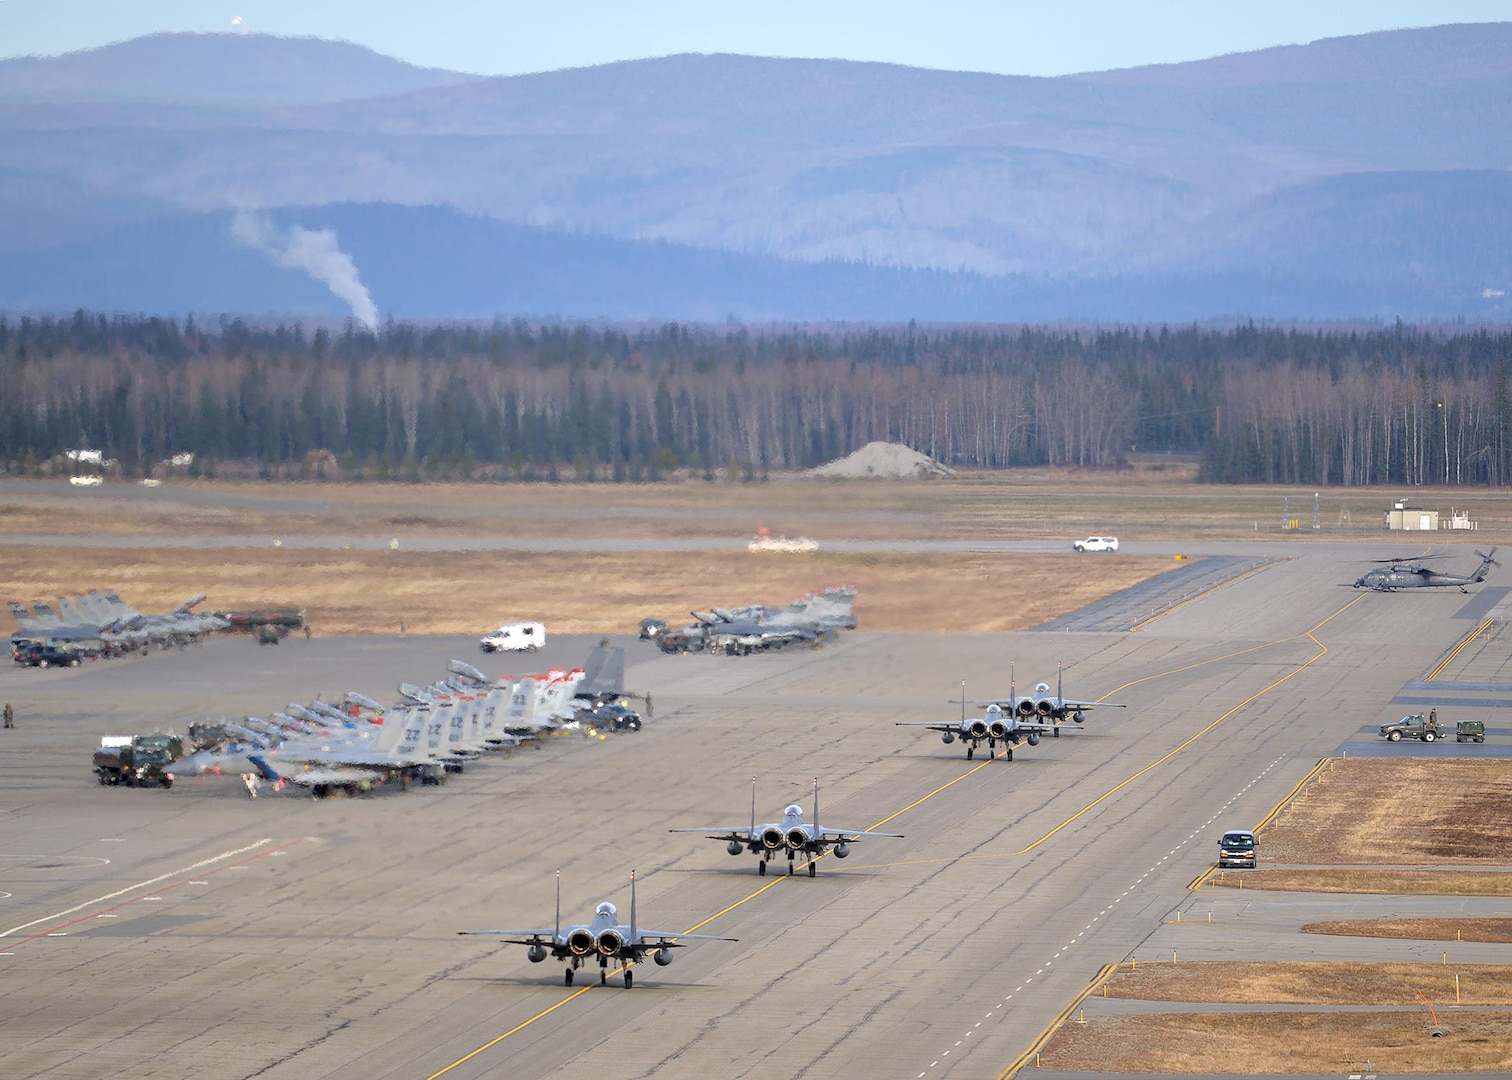 Republic of Korea Air Force (ROKAF) F-15K Slam Eagle multi-role fighter aircraft taxi toward their ramp space on the Eielson Air Force Base, Alaska, flight line Oct. 10, 2016, as a U.S. Air Force HH-60 Pave Hawk helicopter assigned to the 210th Rescue Squadron prepares for its own mission after the first RED FLAG-Alaska (RF-A) 17-1 combat training sortie ended. RF-A is a series of Pacific Air Forces commander-directed field training exercises vital to maintaining peace and stability in the Indo-Asia-Pacific region, and providing U.S. units and partner nation forces the opportunity to sharpen their combat skills and strengthen interoperability inside more than 67,000 square miles of airspace in the Joint Pacific Alaska Range Complex. (U.S. Air Force photo by Master Sgt. Karen J. Tomasik)